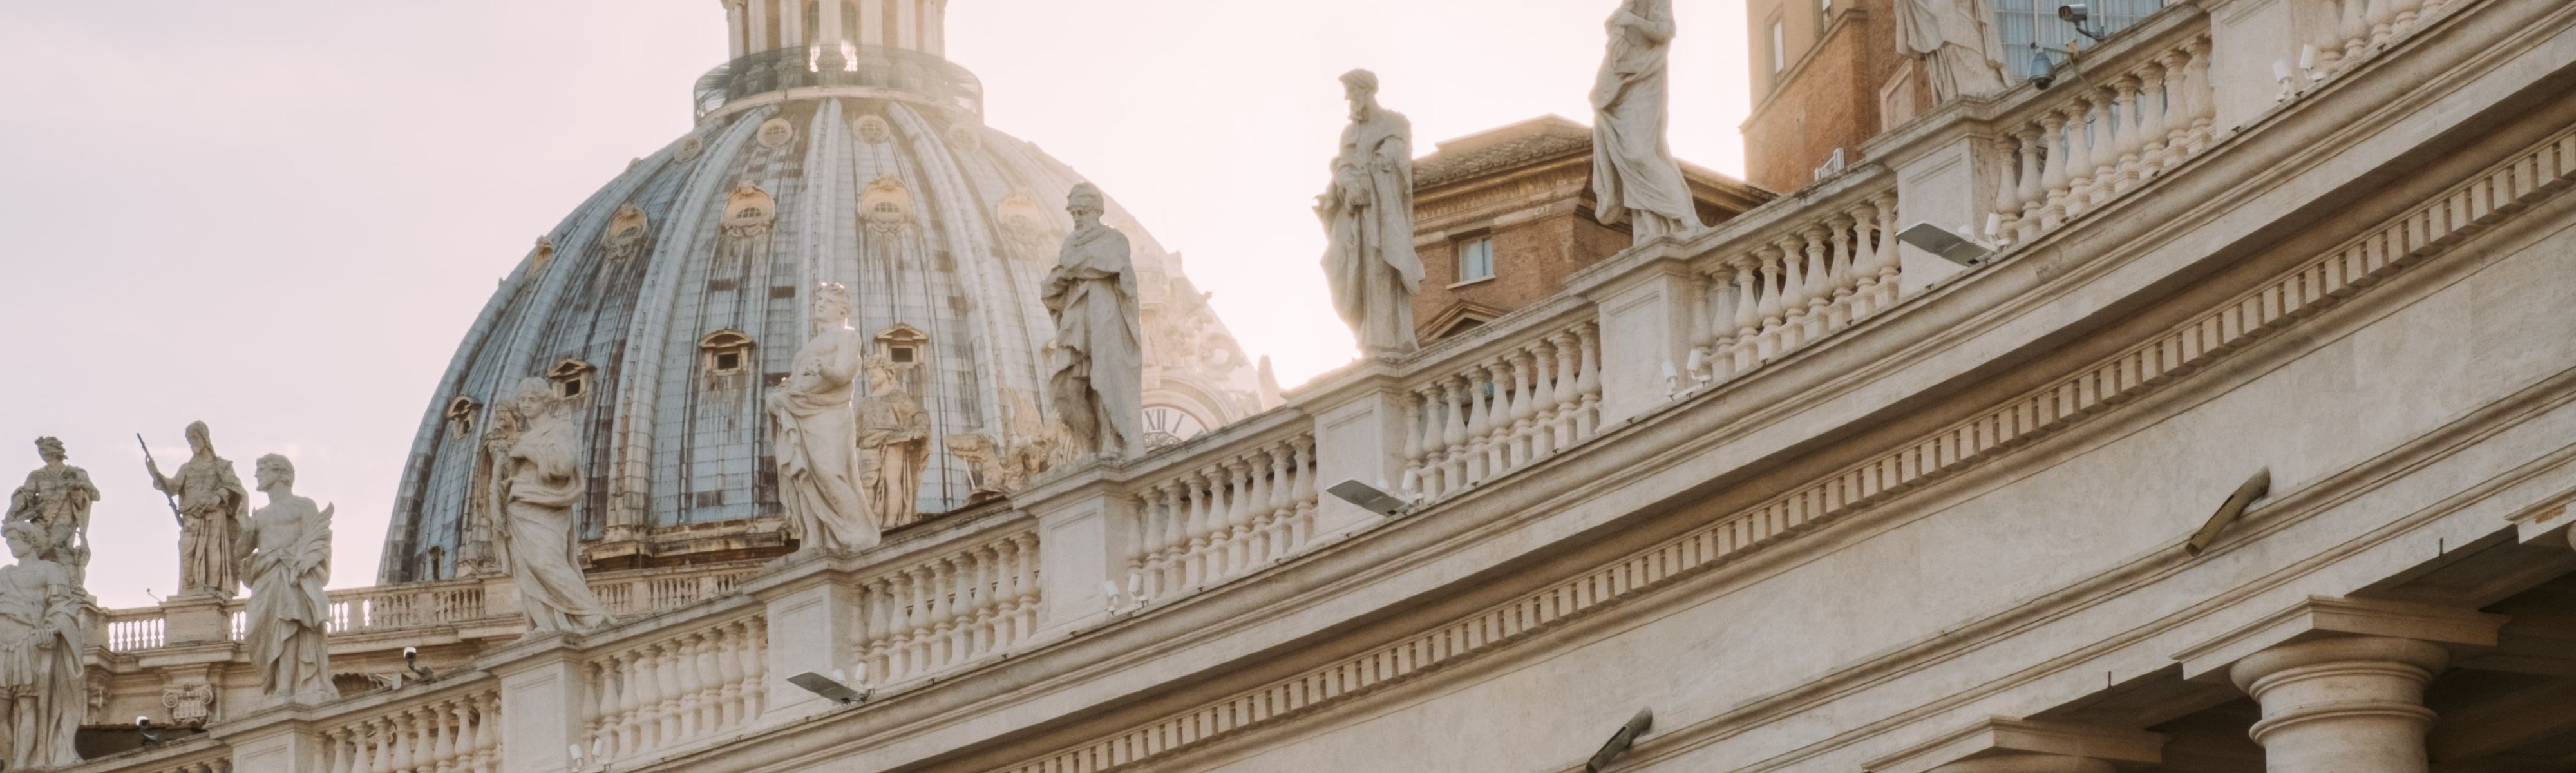 statues on top of vatican in rome